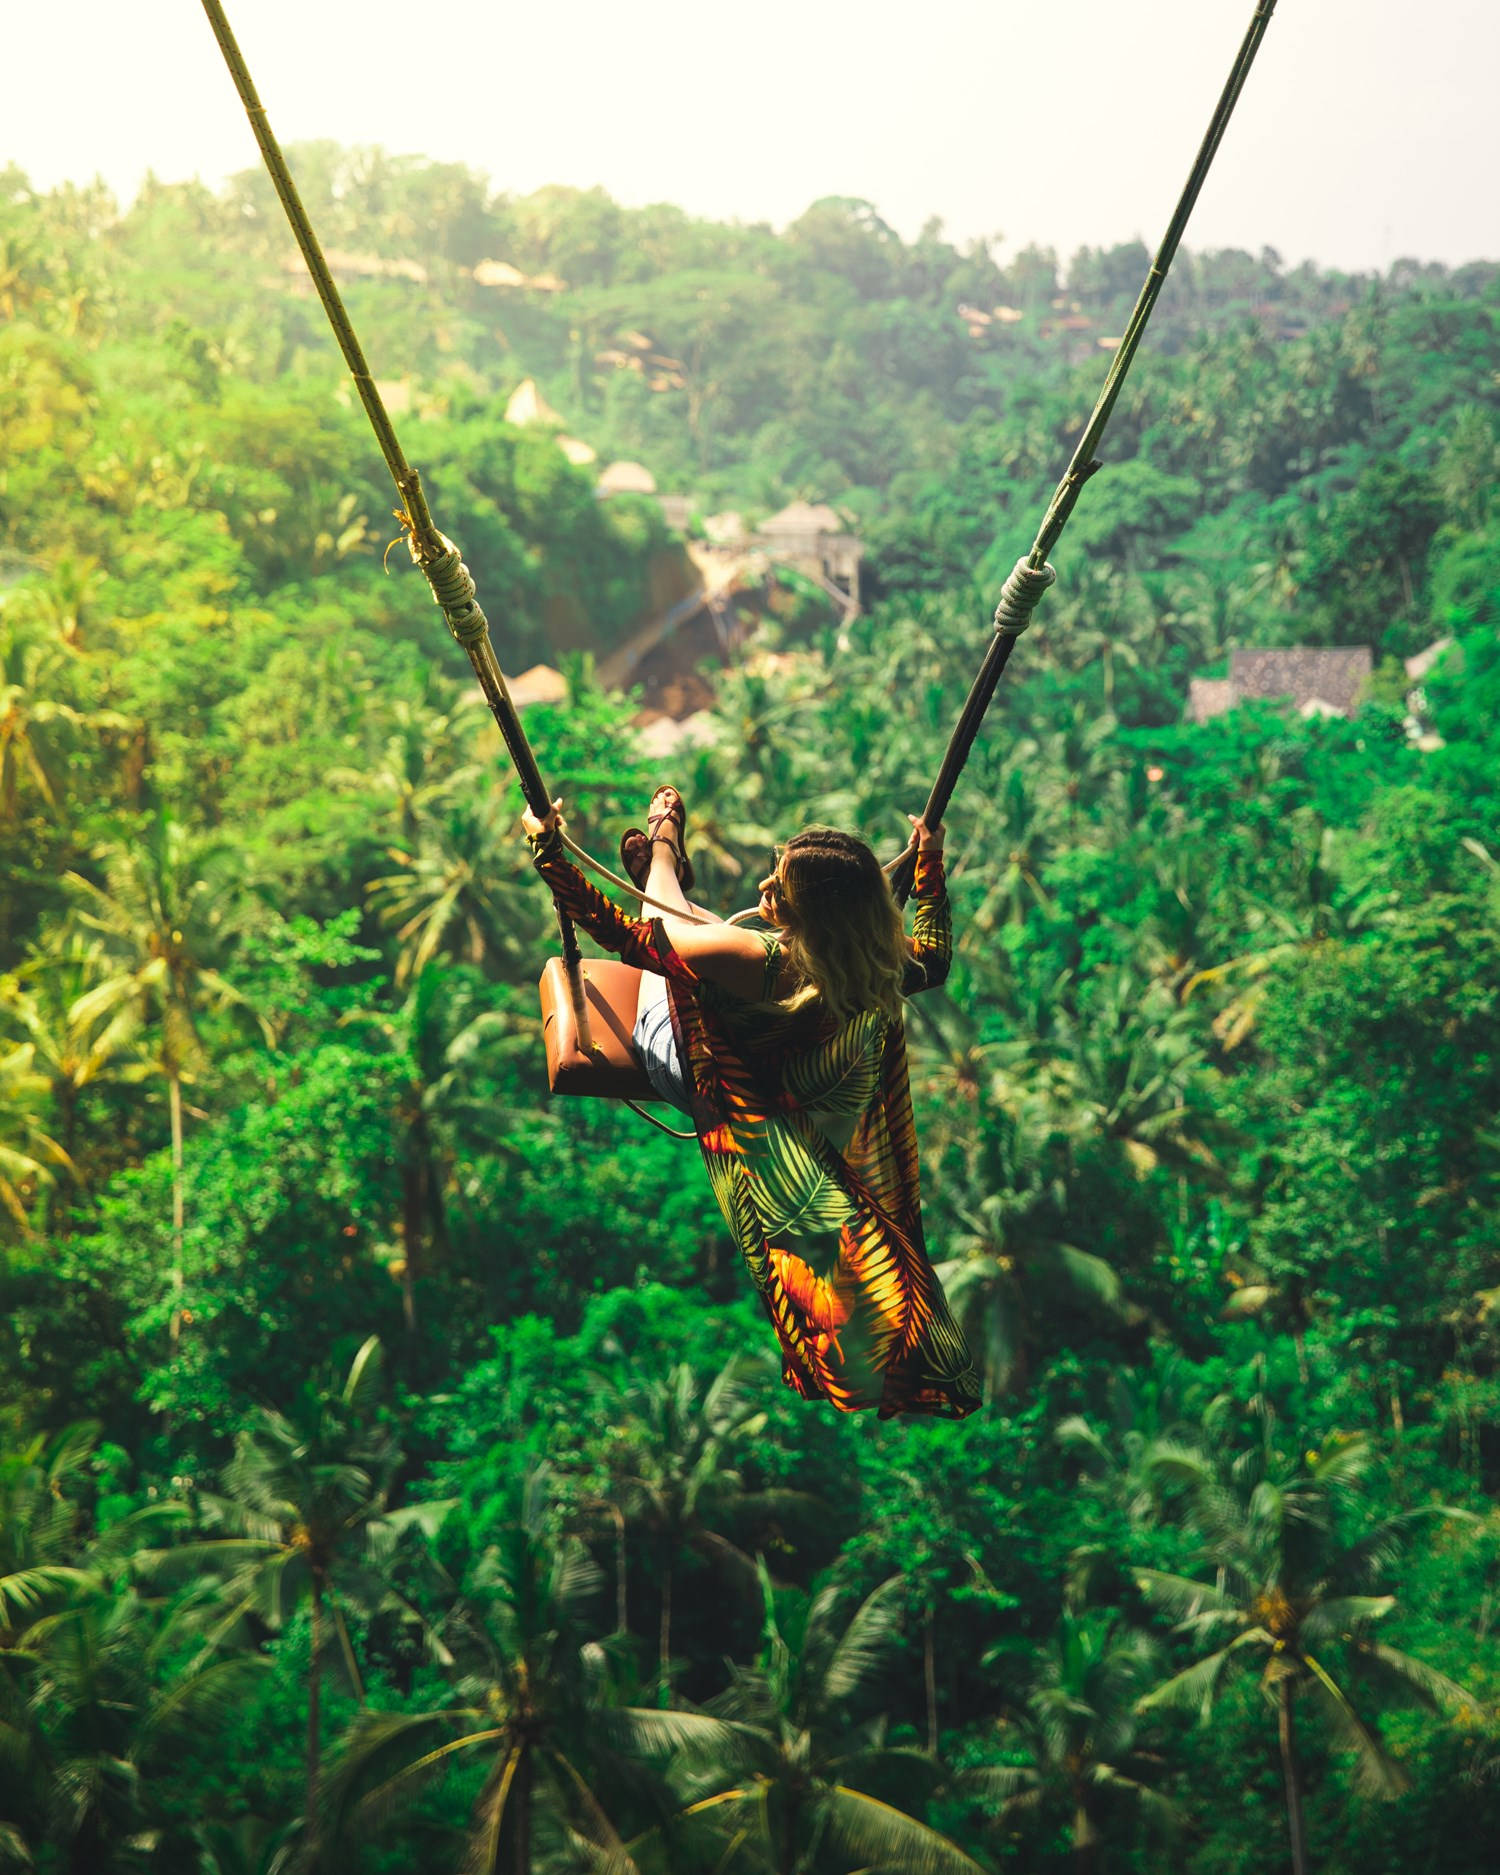 Bali Swing Indonesia Tourist Attraction Background